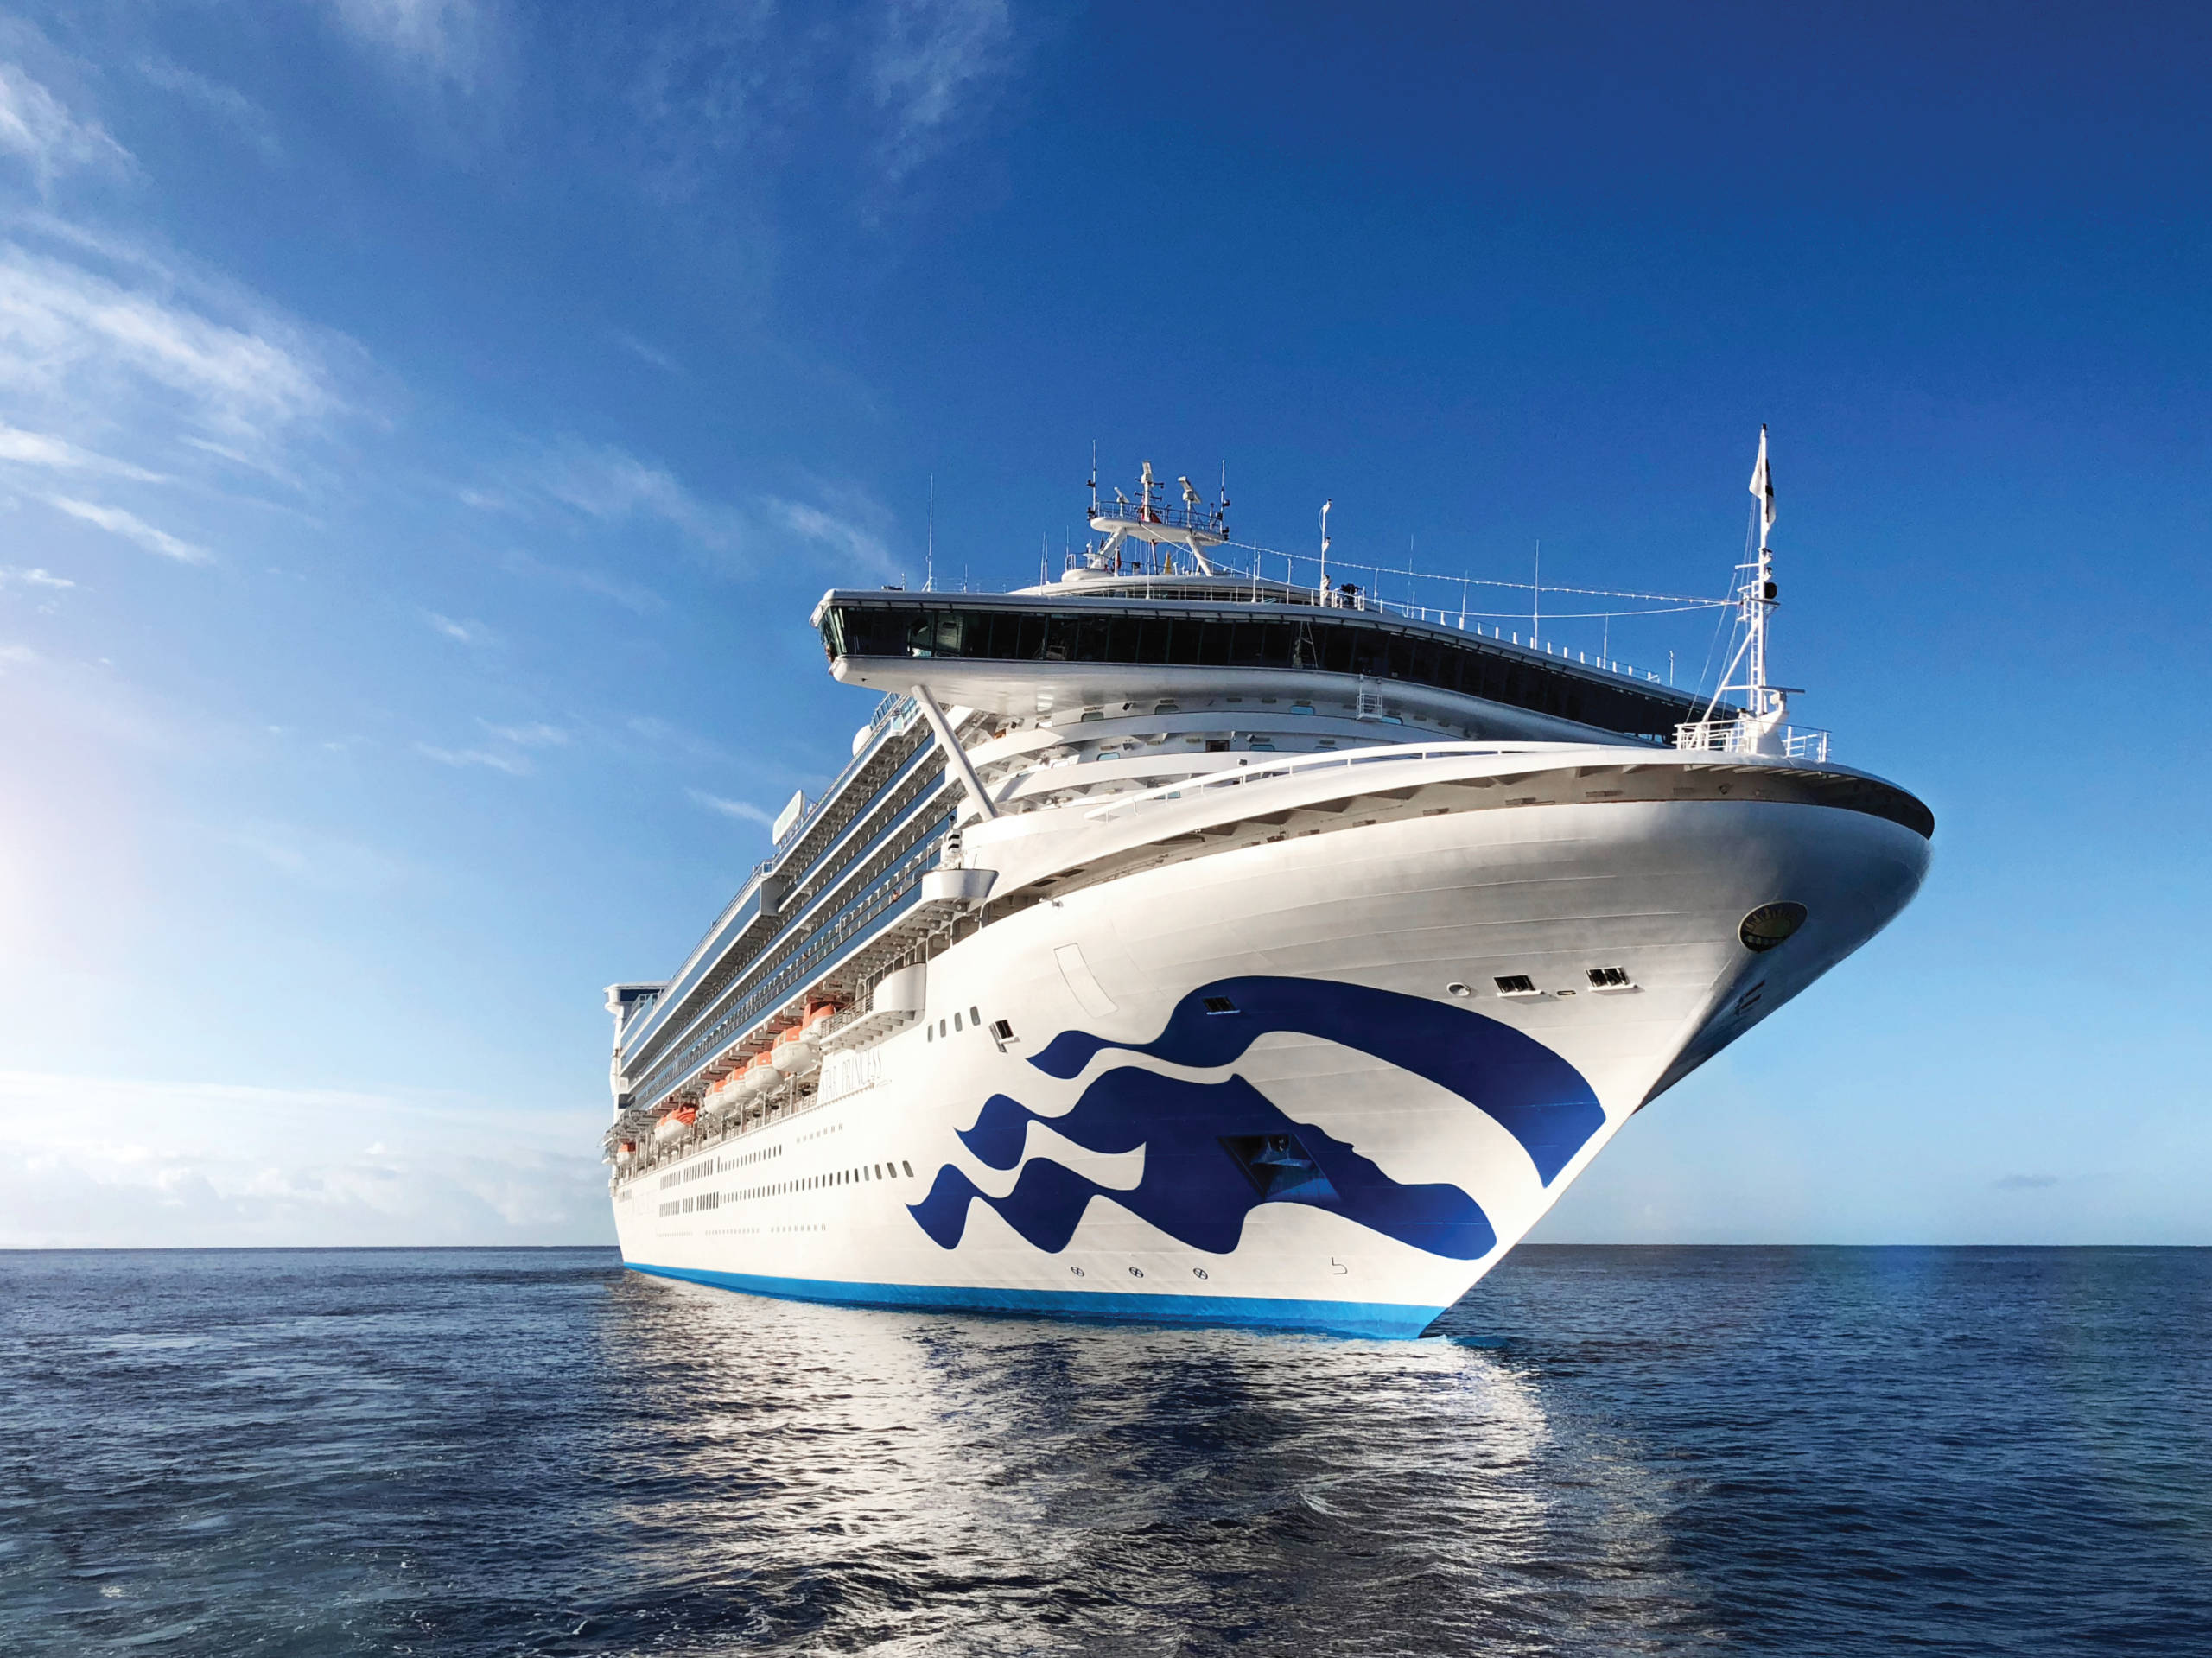 48+ Best part of cruise ship front or back ideas in 2021 